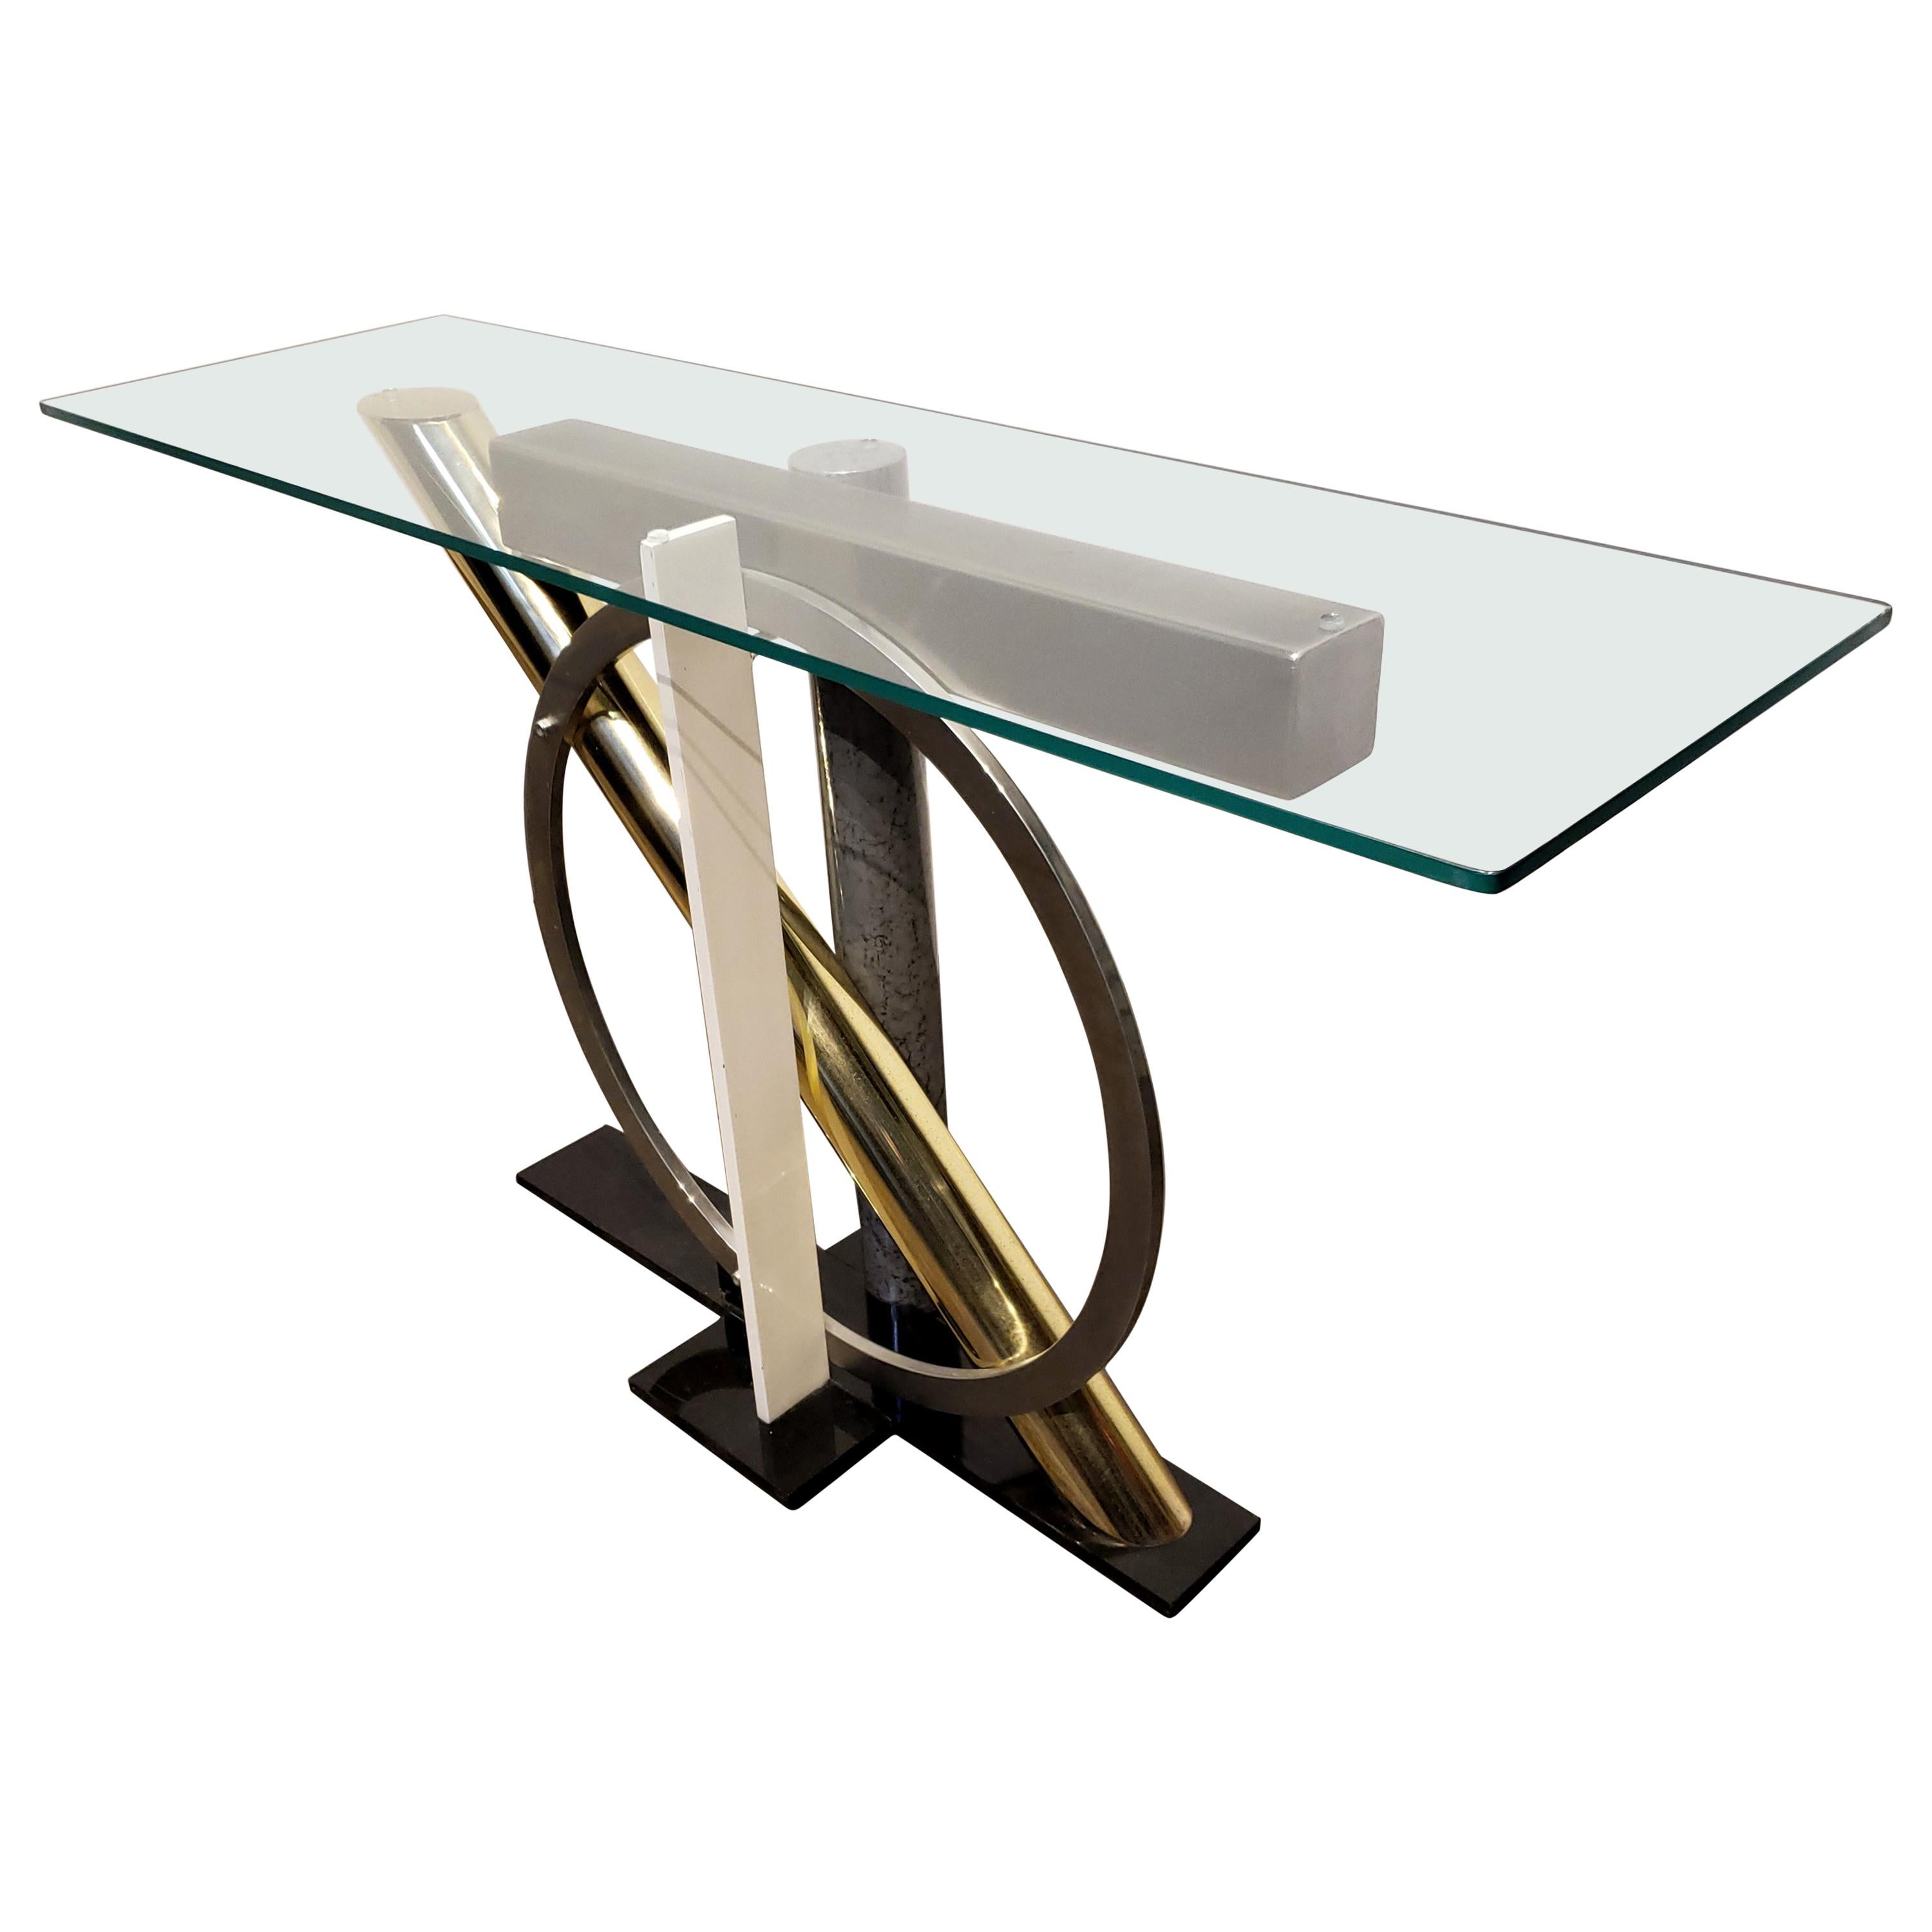 1980s Geometric Metal and Glass Memphis Style Console Table by Kaizo Oto for DIA For Sale